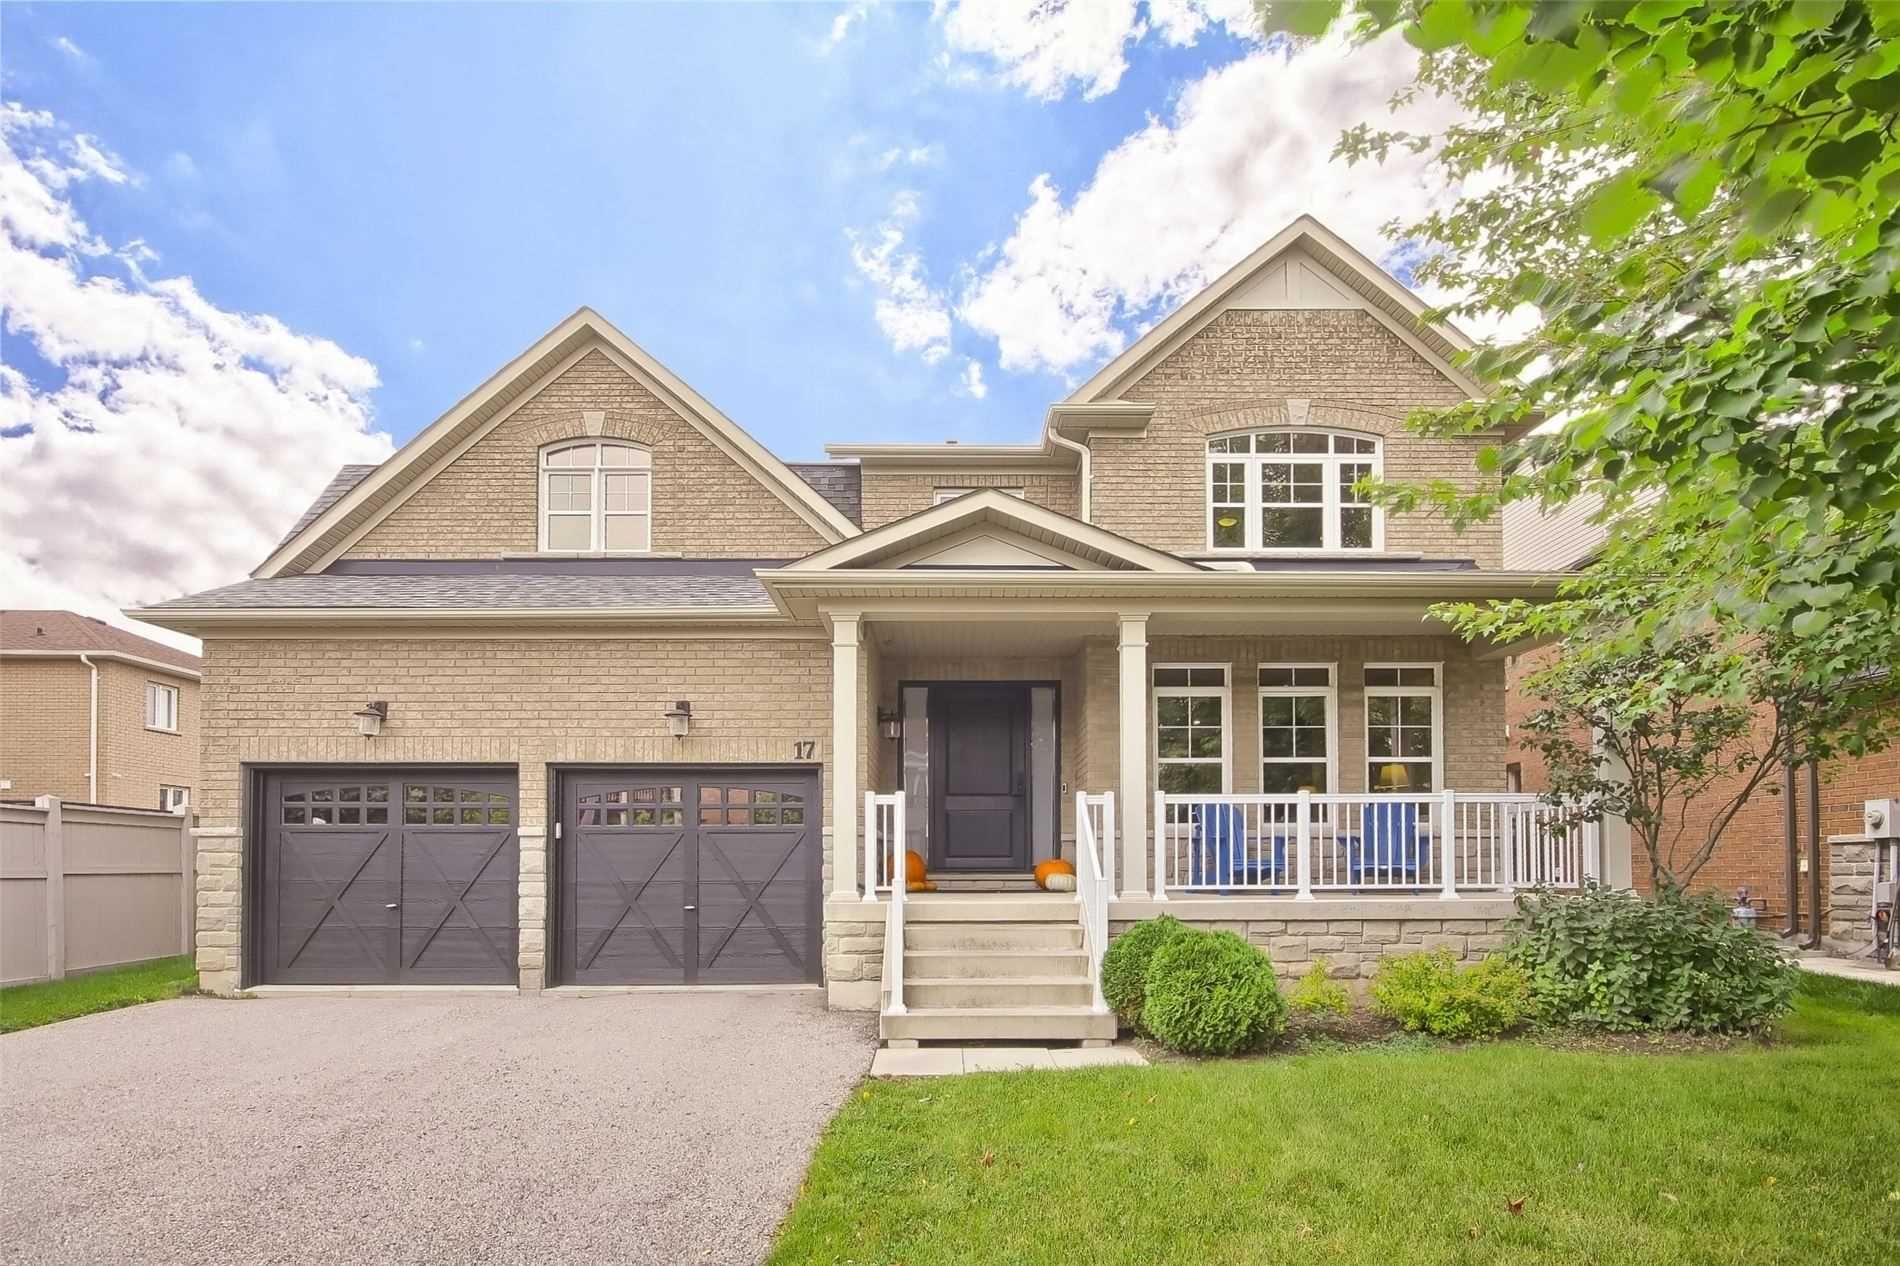 I have sold a property at 17 Trailside DR in Bradford West Gwillimbury
